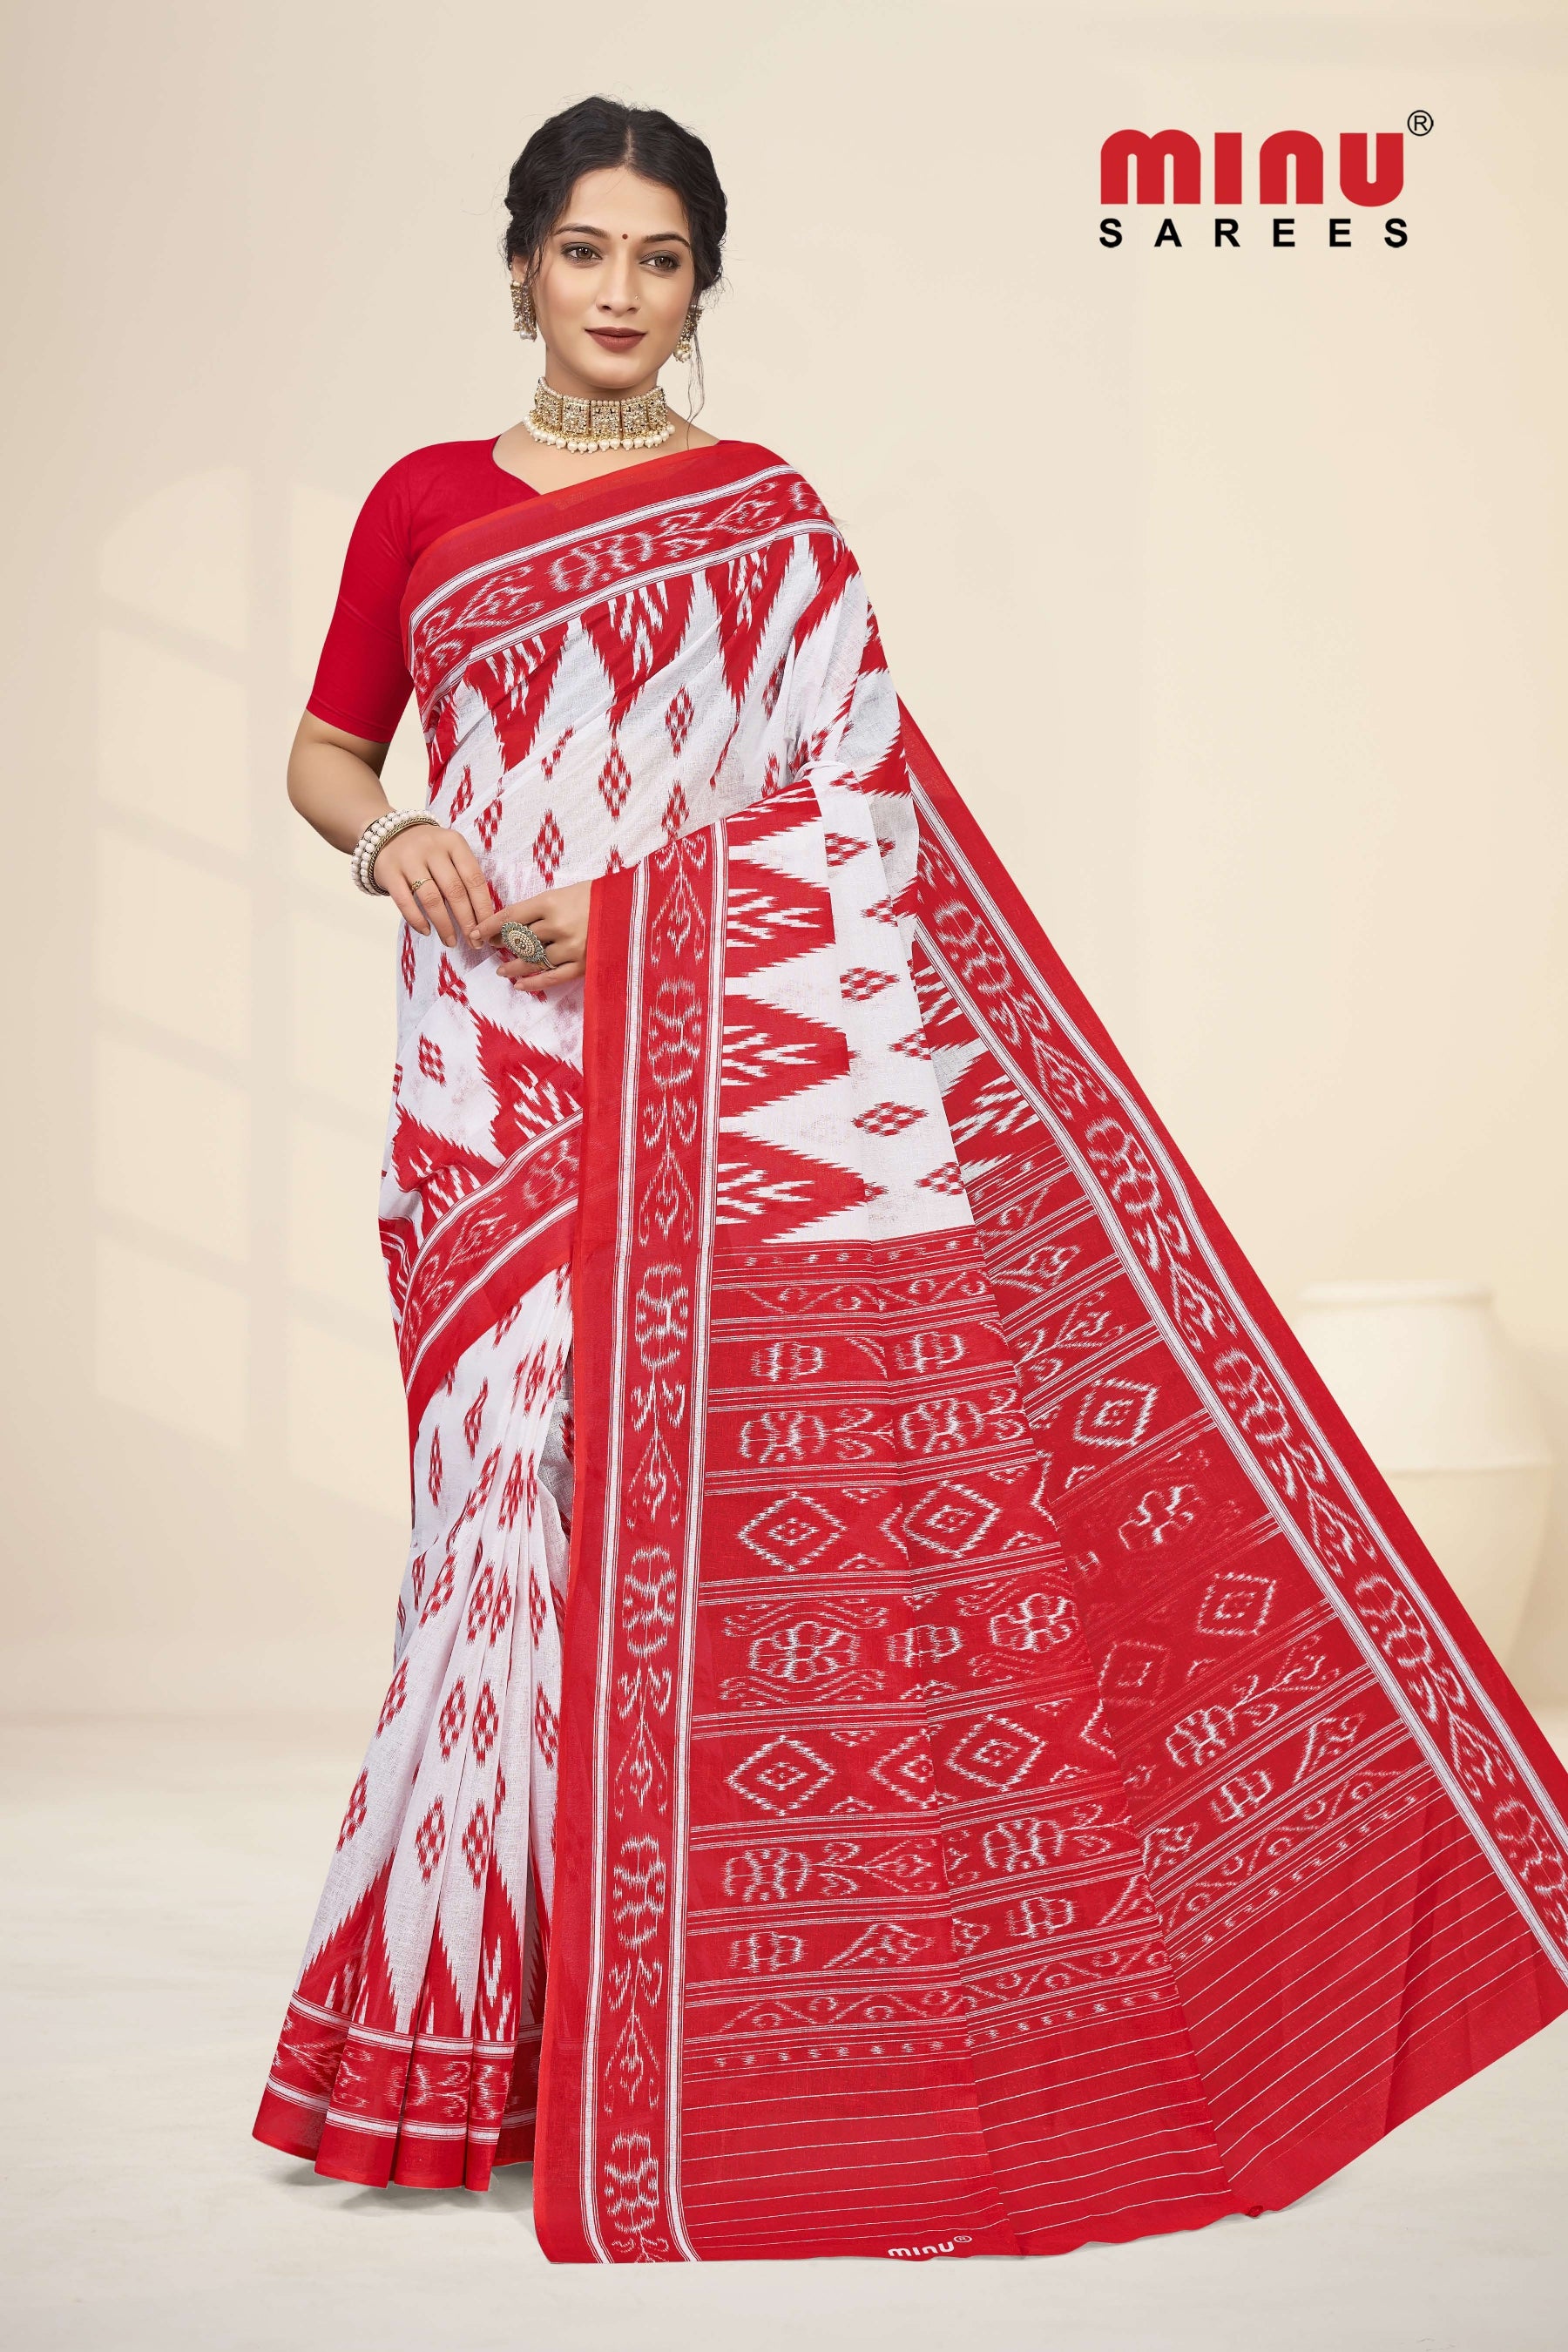 Top quality red color printed saree wearing woman retail image